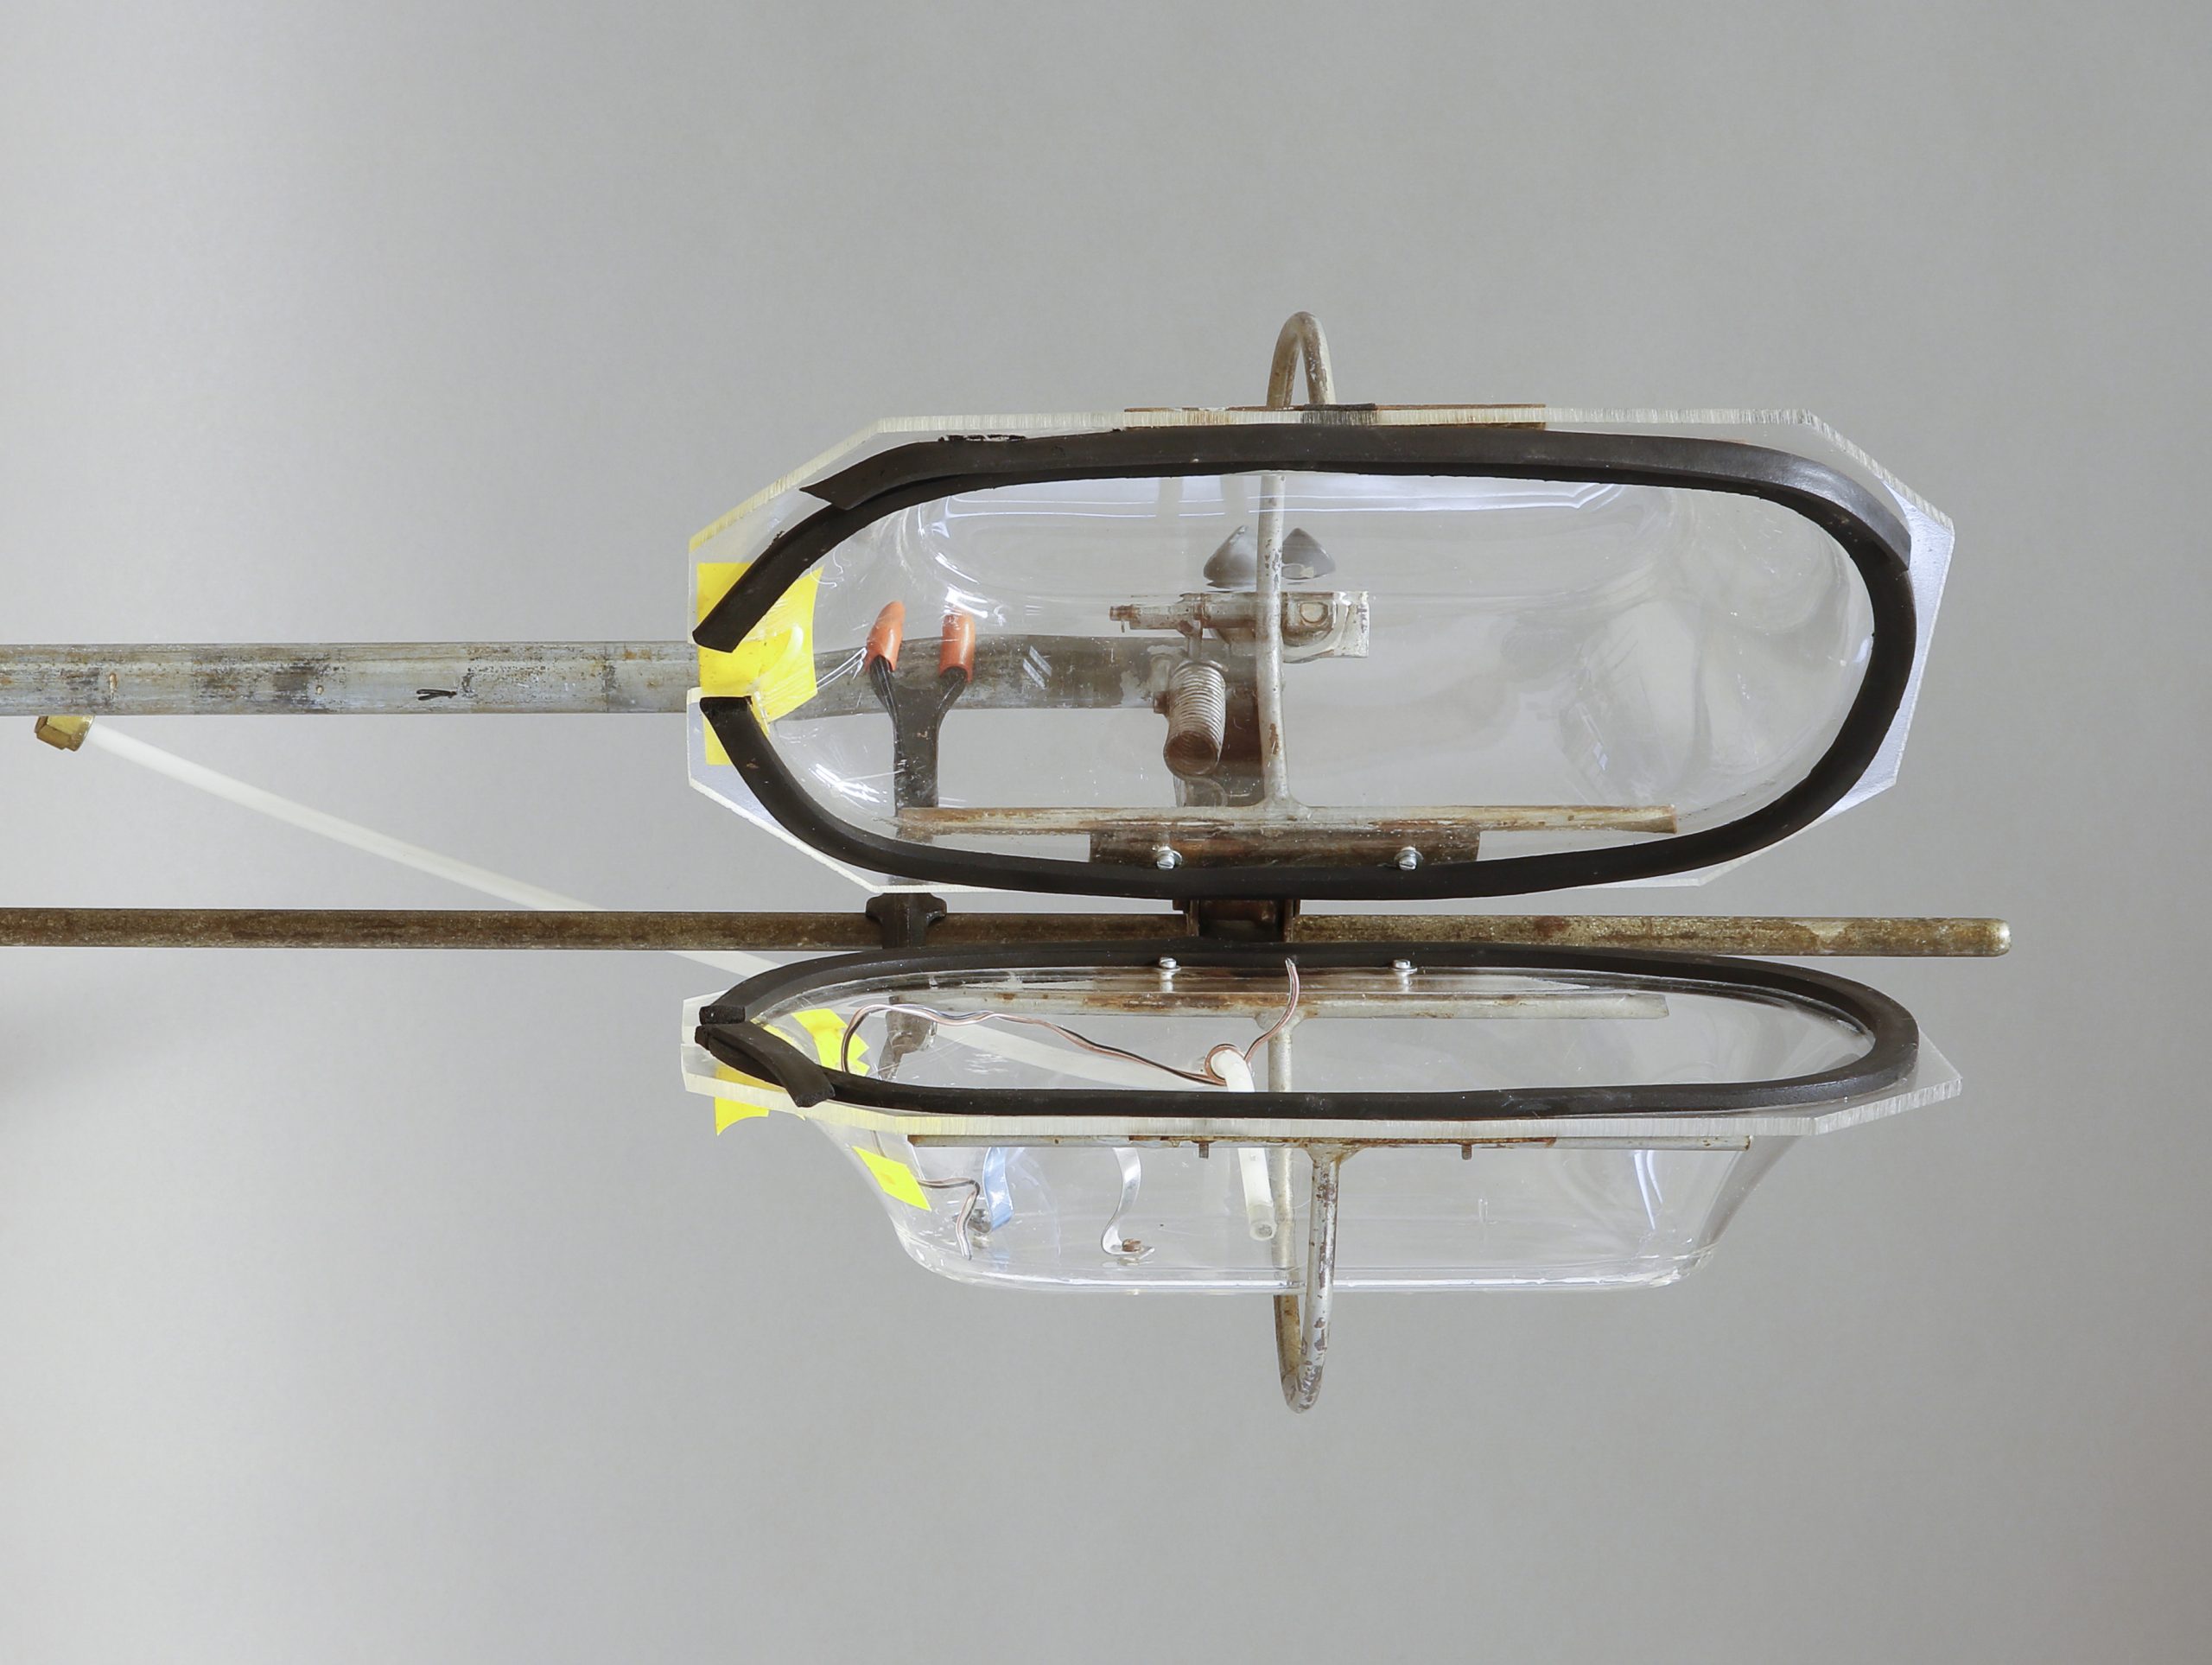 A plastic transparent research container, composed of two parts, fixed on an iron stand.